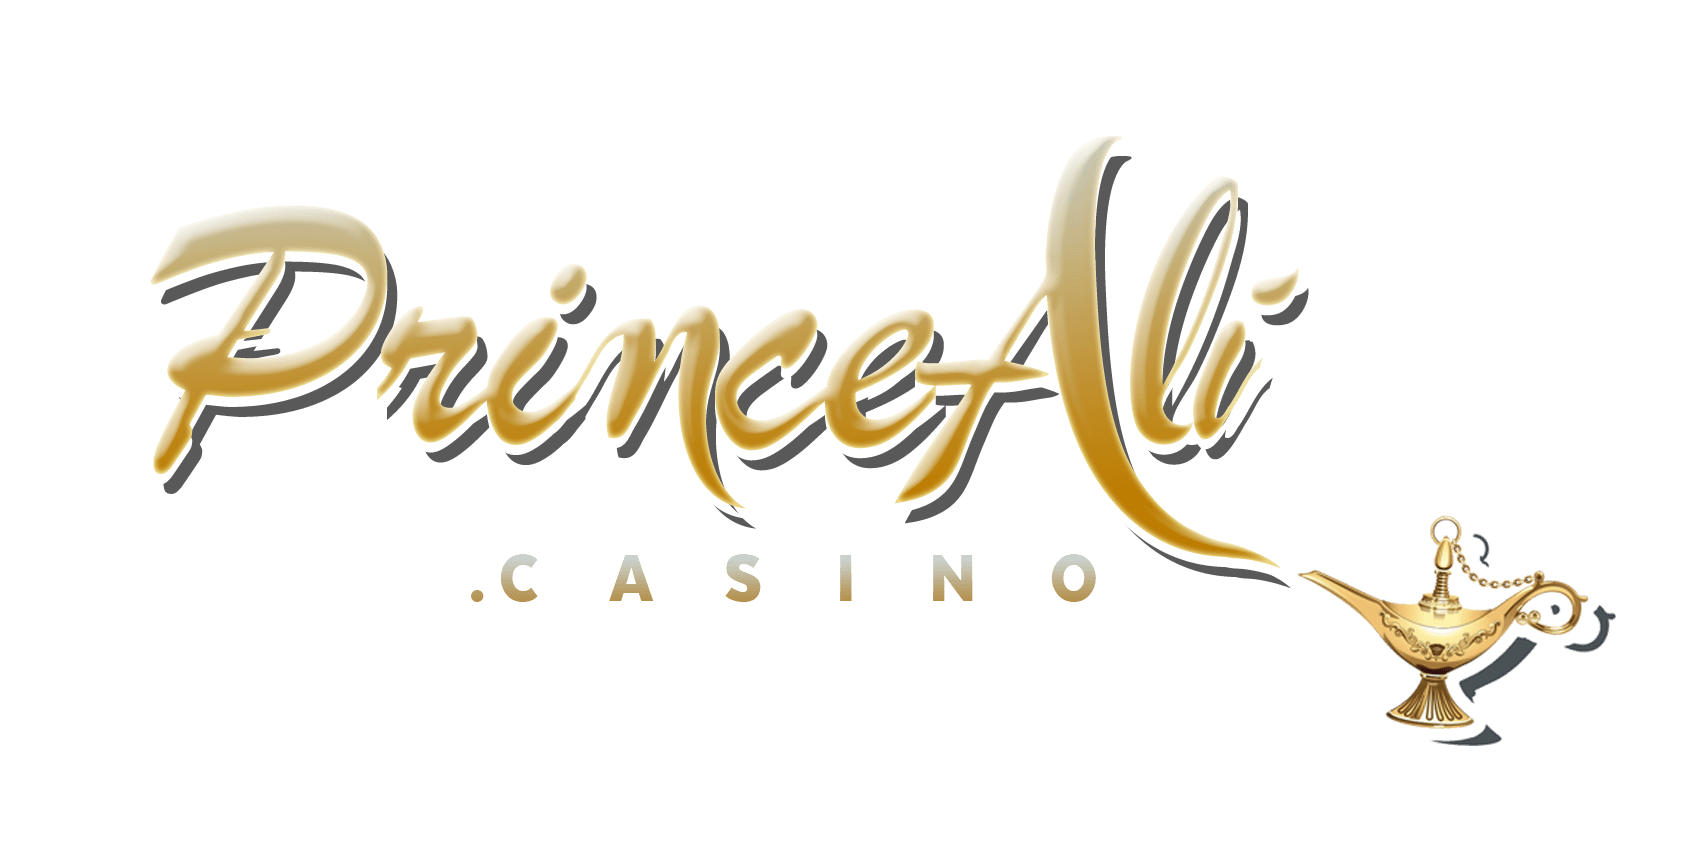 PrinceAli Casino voucher codes for canadian players